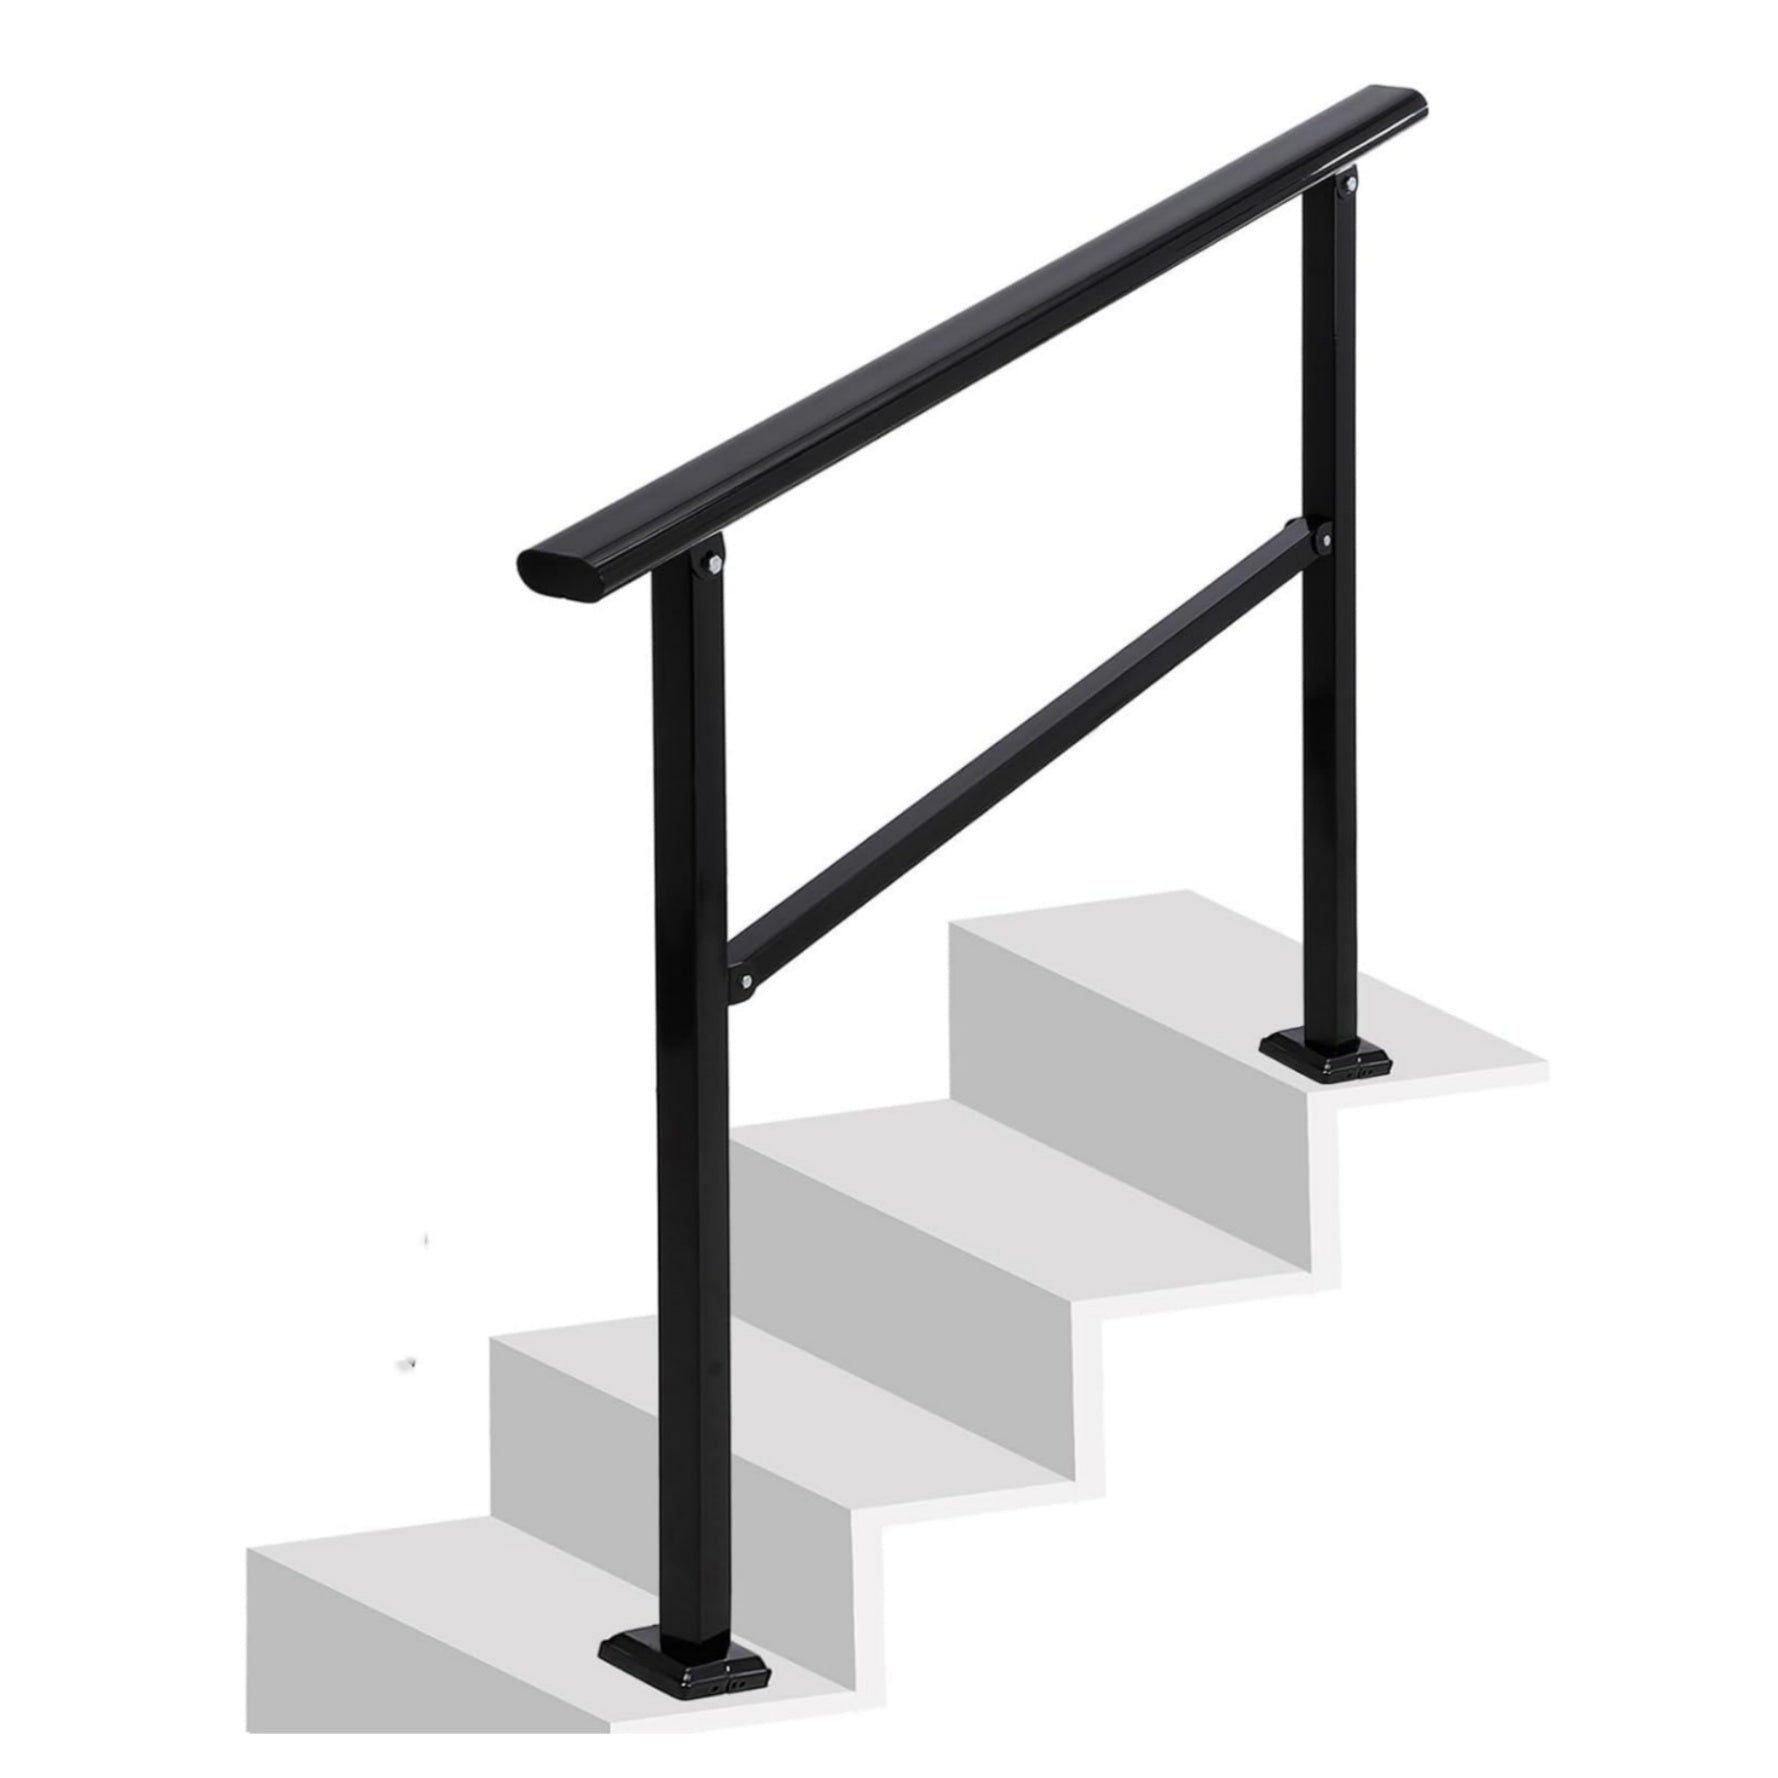 Outdoor Handrails Adjustable Height Stair Handrail ,Integrated Design at Handrail,Staircase Handrail for Outdoor and Indoor Concrete, Porch, Mixed, Step,Brick Step